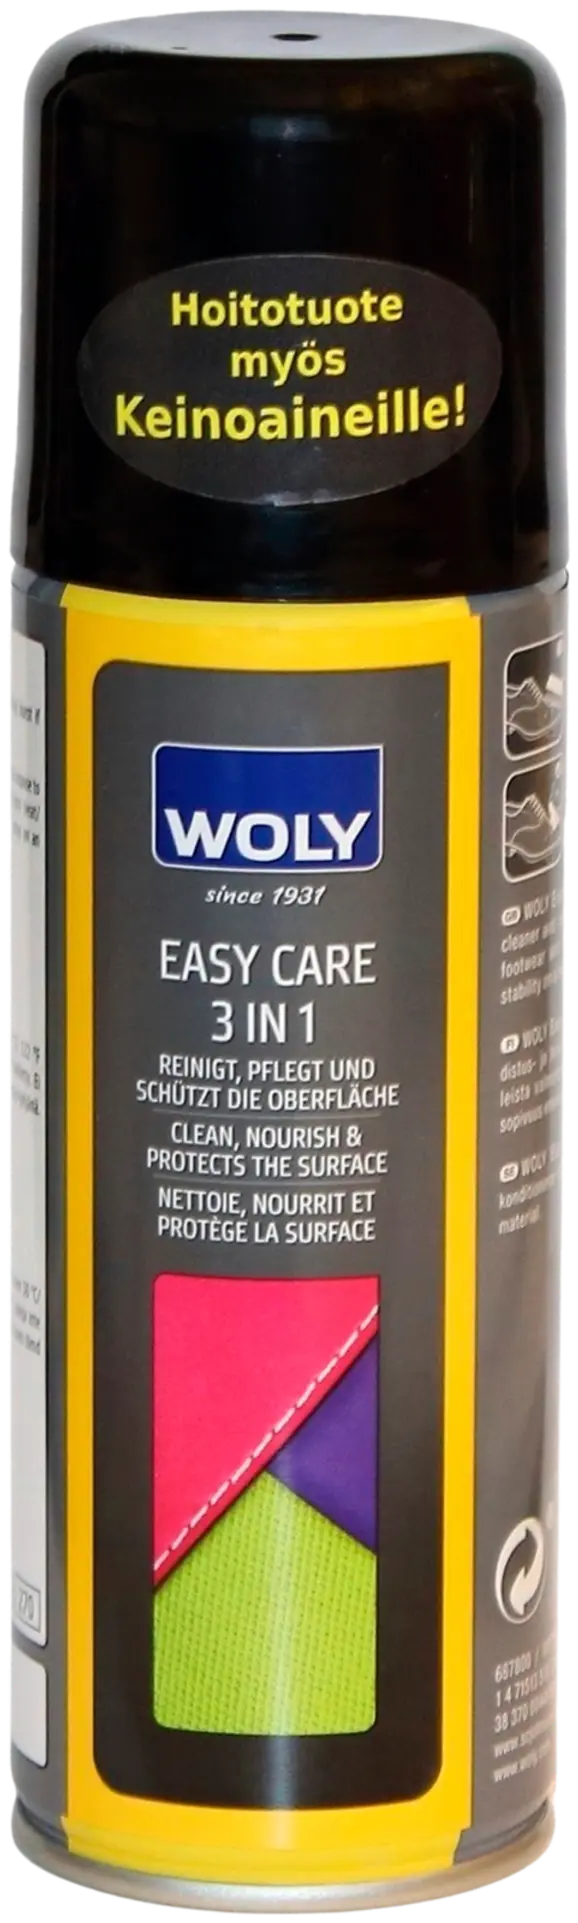 Woly EasyCare 3in1